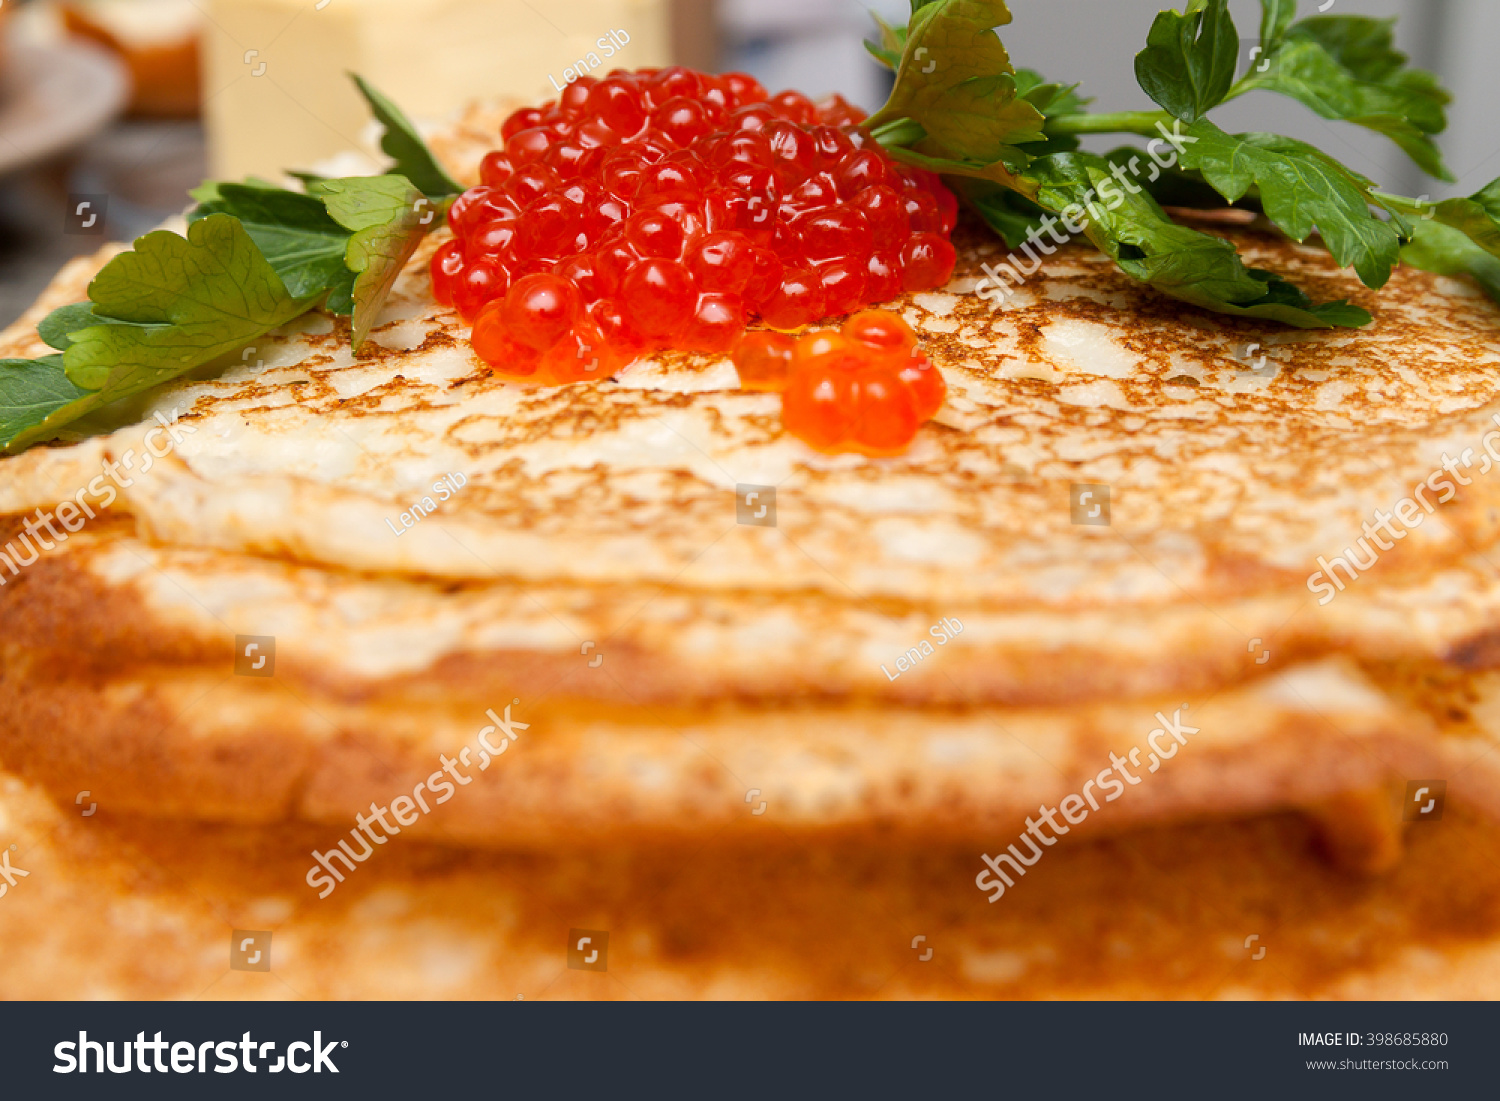 delicious pancakes with red caviar and parsley on a plate #398685880